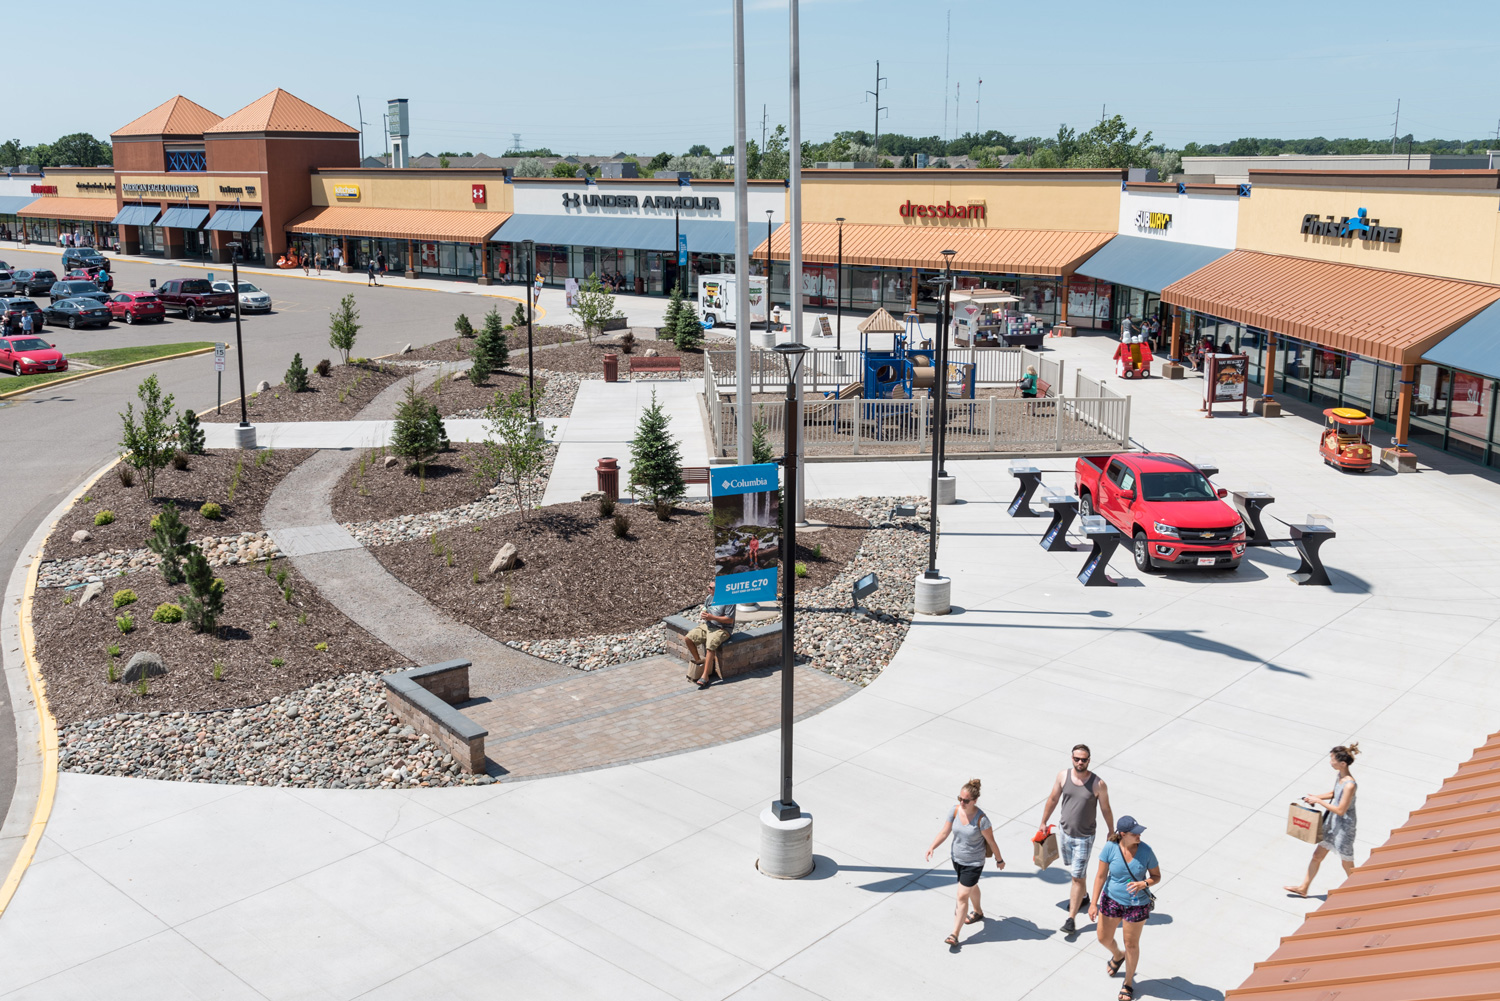 Albertville Premium Outlets - Outlet mall in Minnesota. Location & hours.